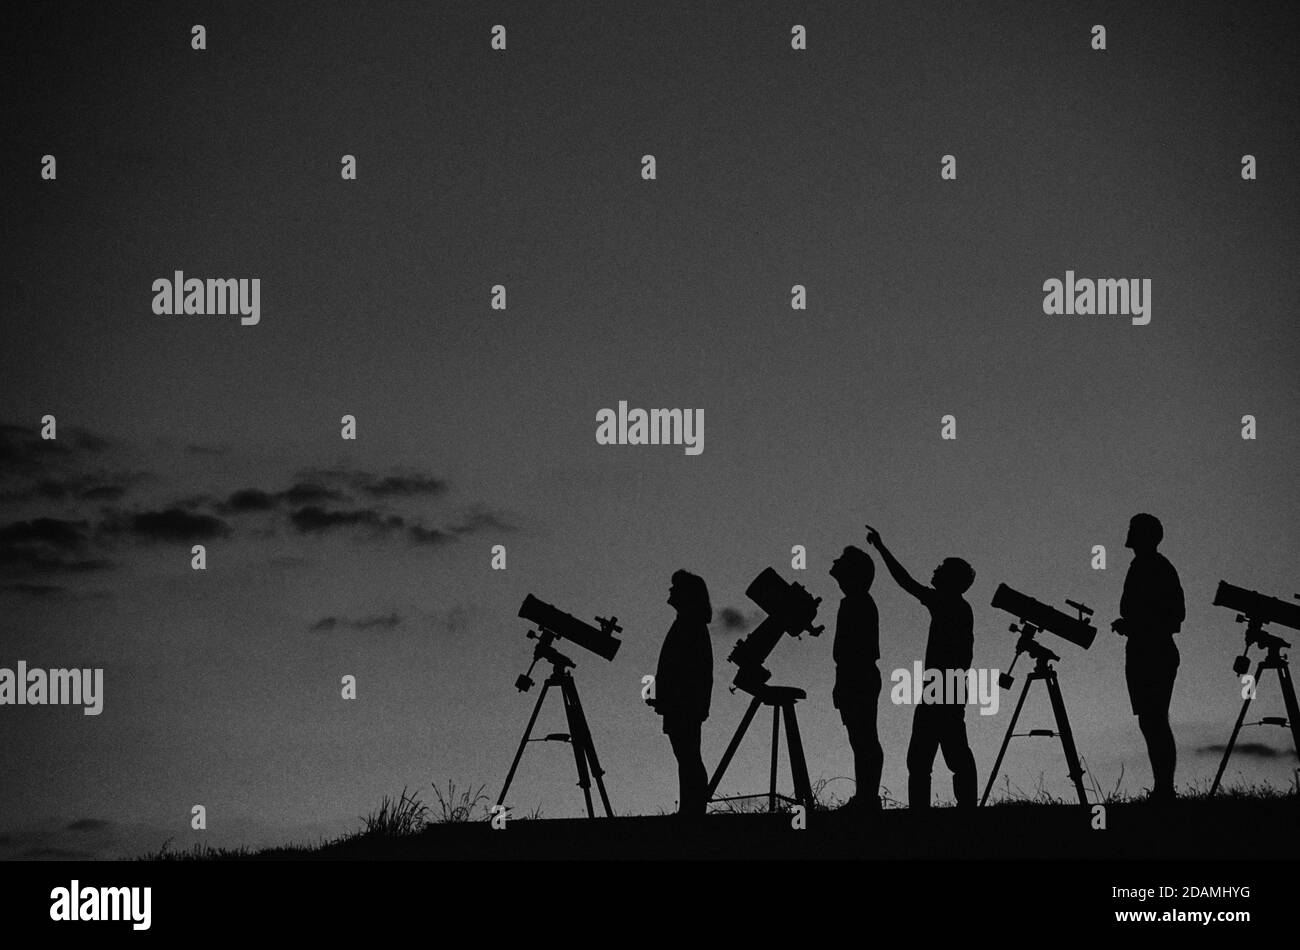 Amateur astronomer hi-res stock photography and images photo picture